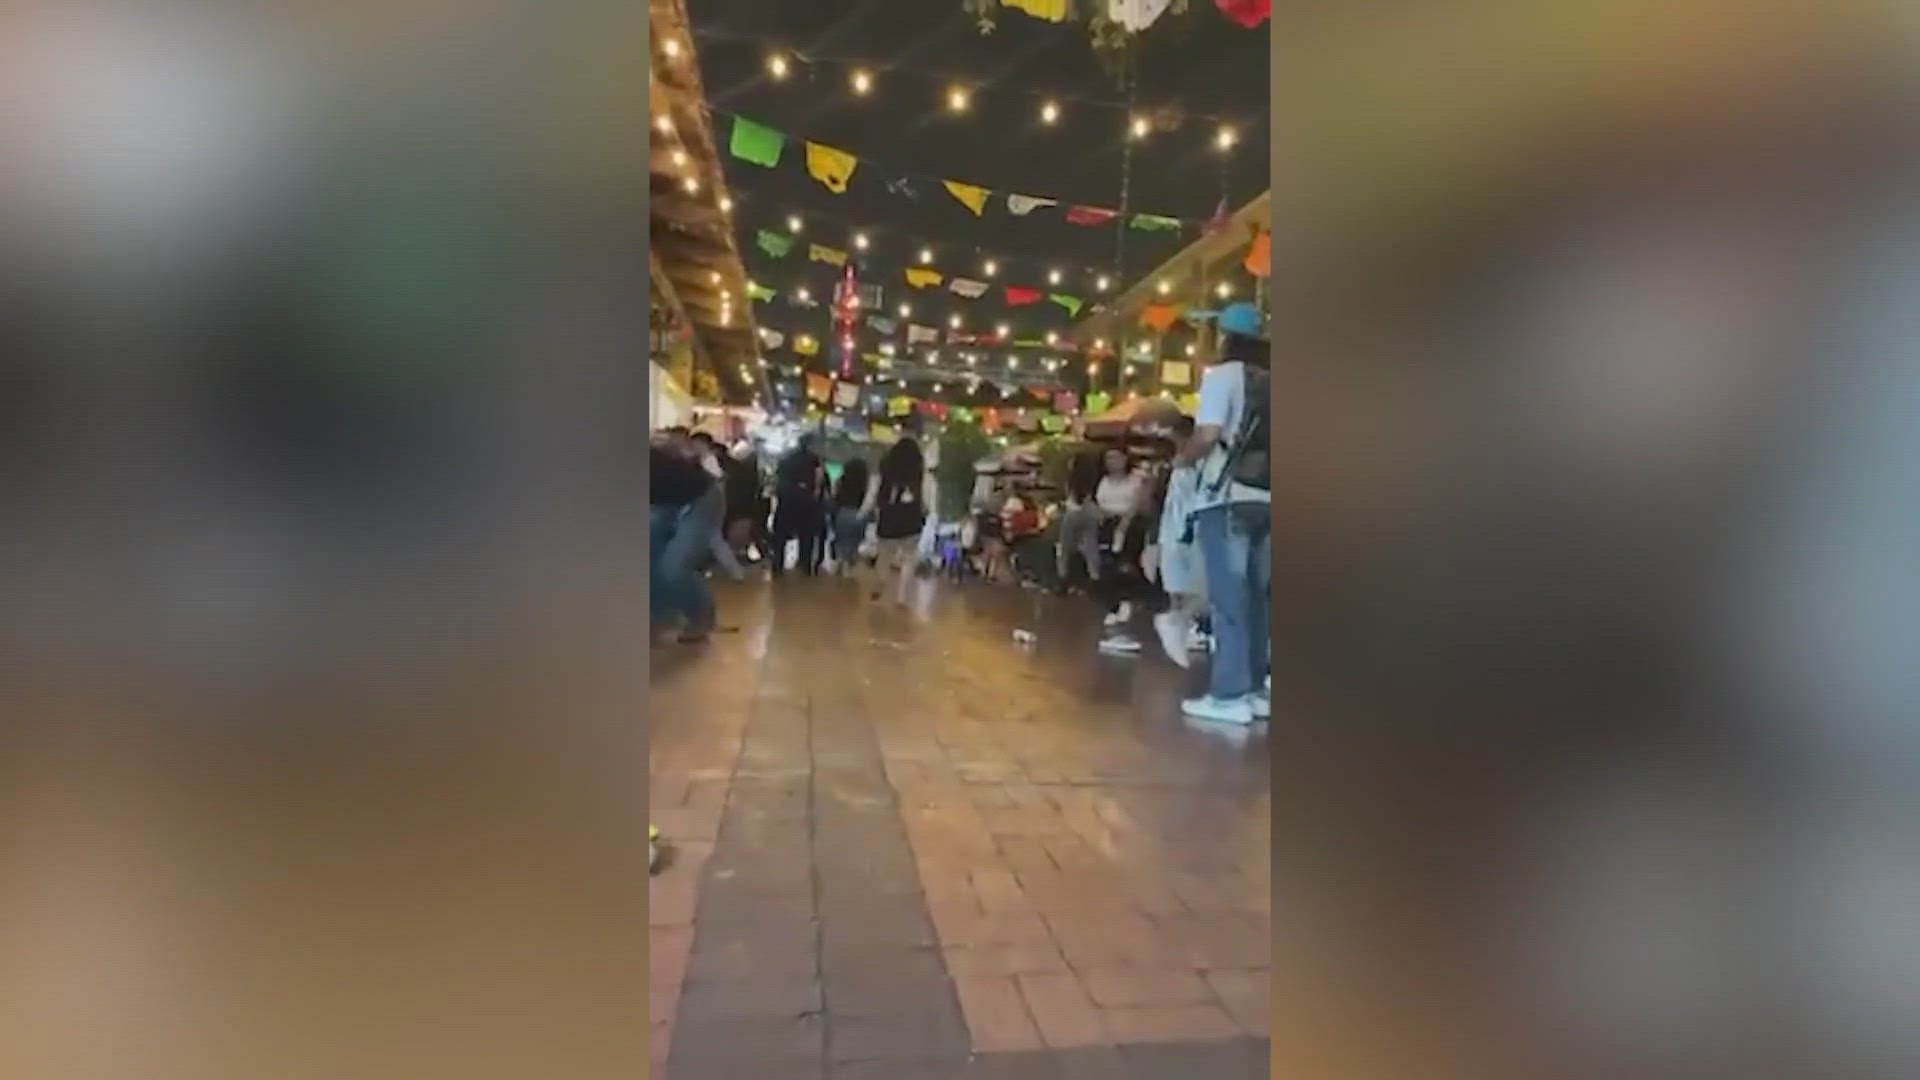 Around midnight last night, two people were killed and four bystanders were hurt after violence broke out during Fiesta celebrations at the Historic Market Square.